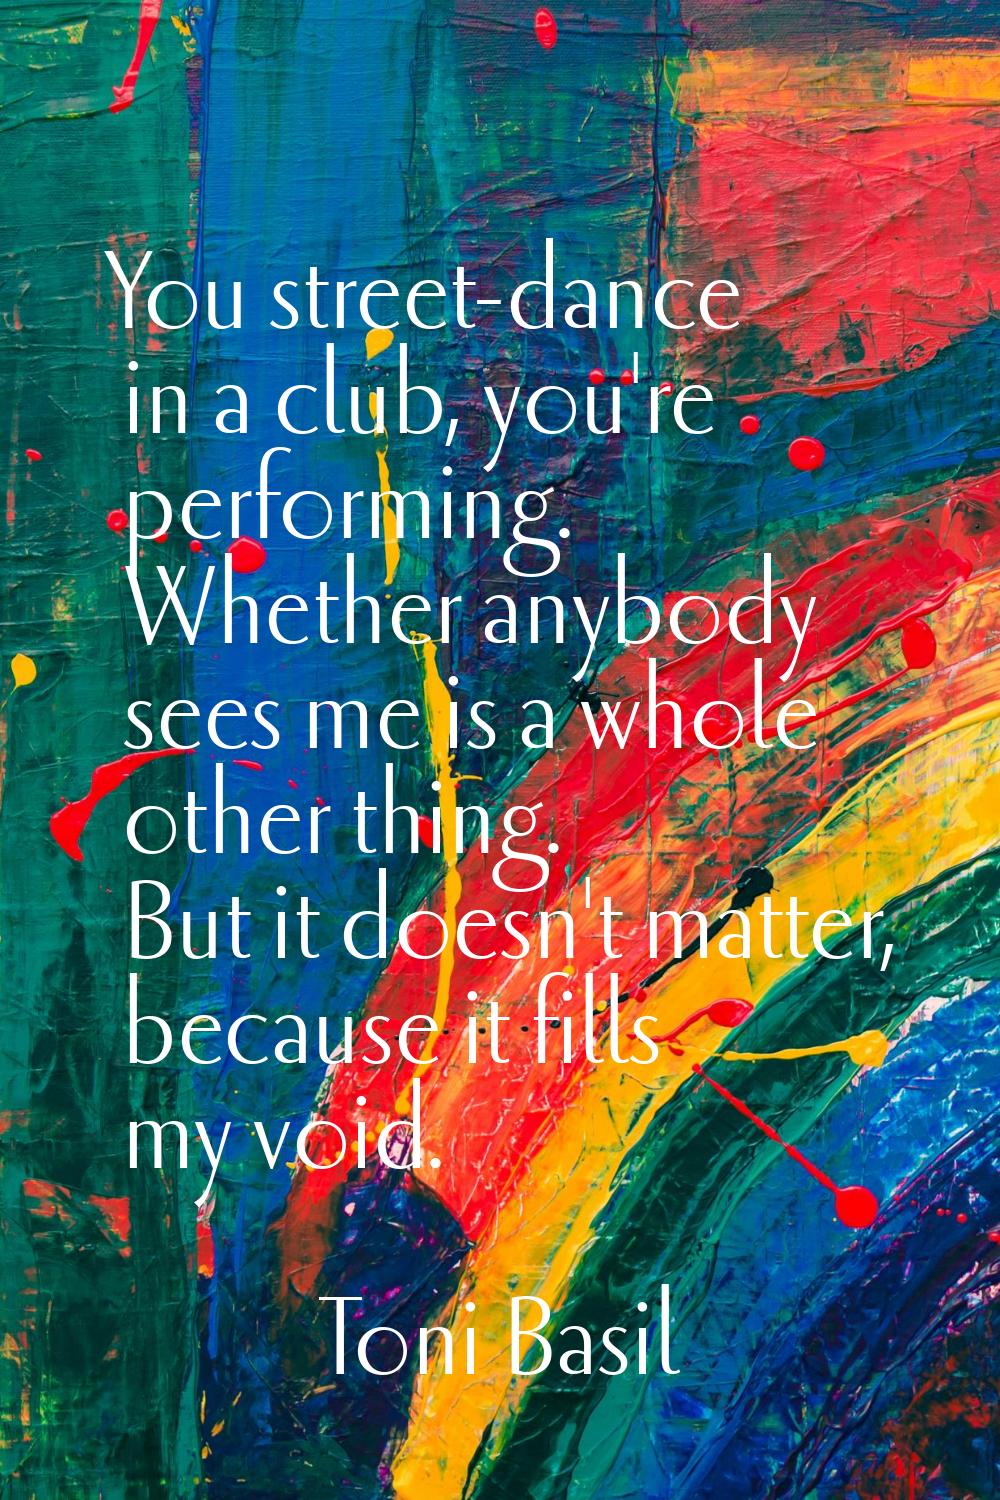 You street-dance in a club, you're performing. Whether anybody sees me is a whole other thing. But 